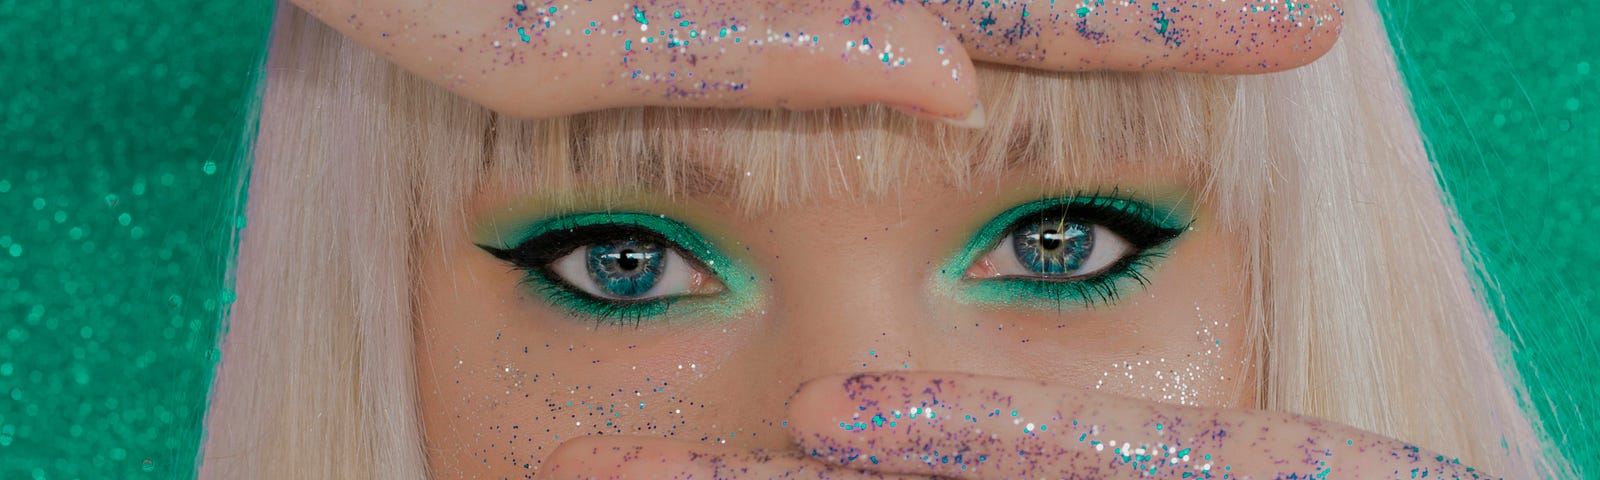 platinum blonde with green eyeshow and blue glitter on hands